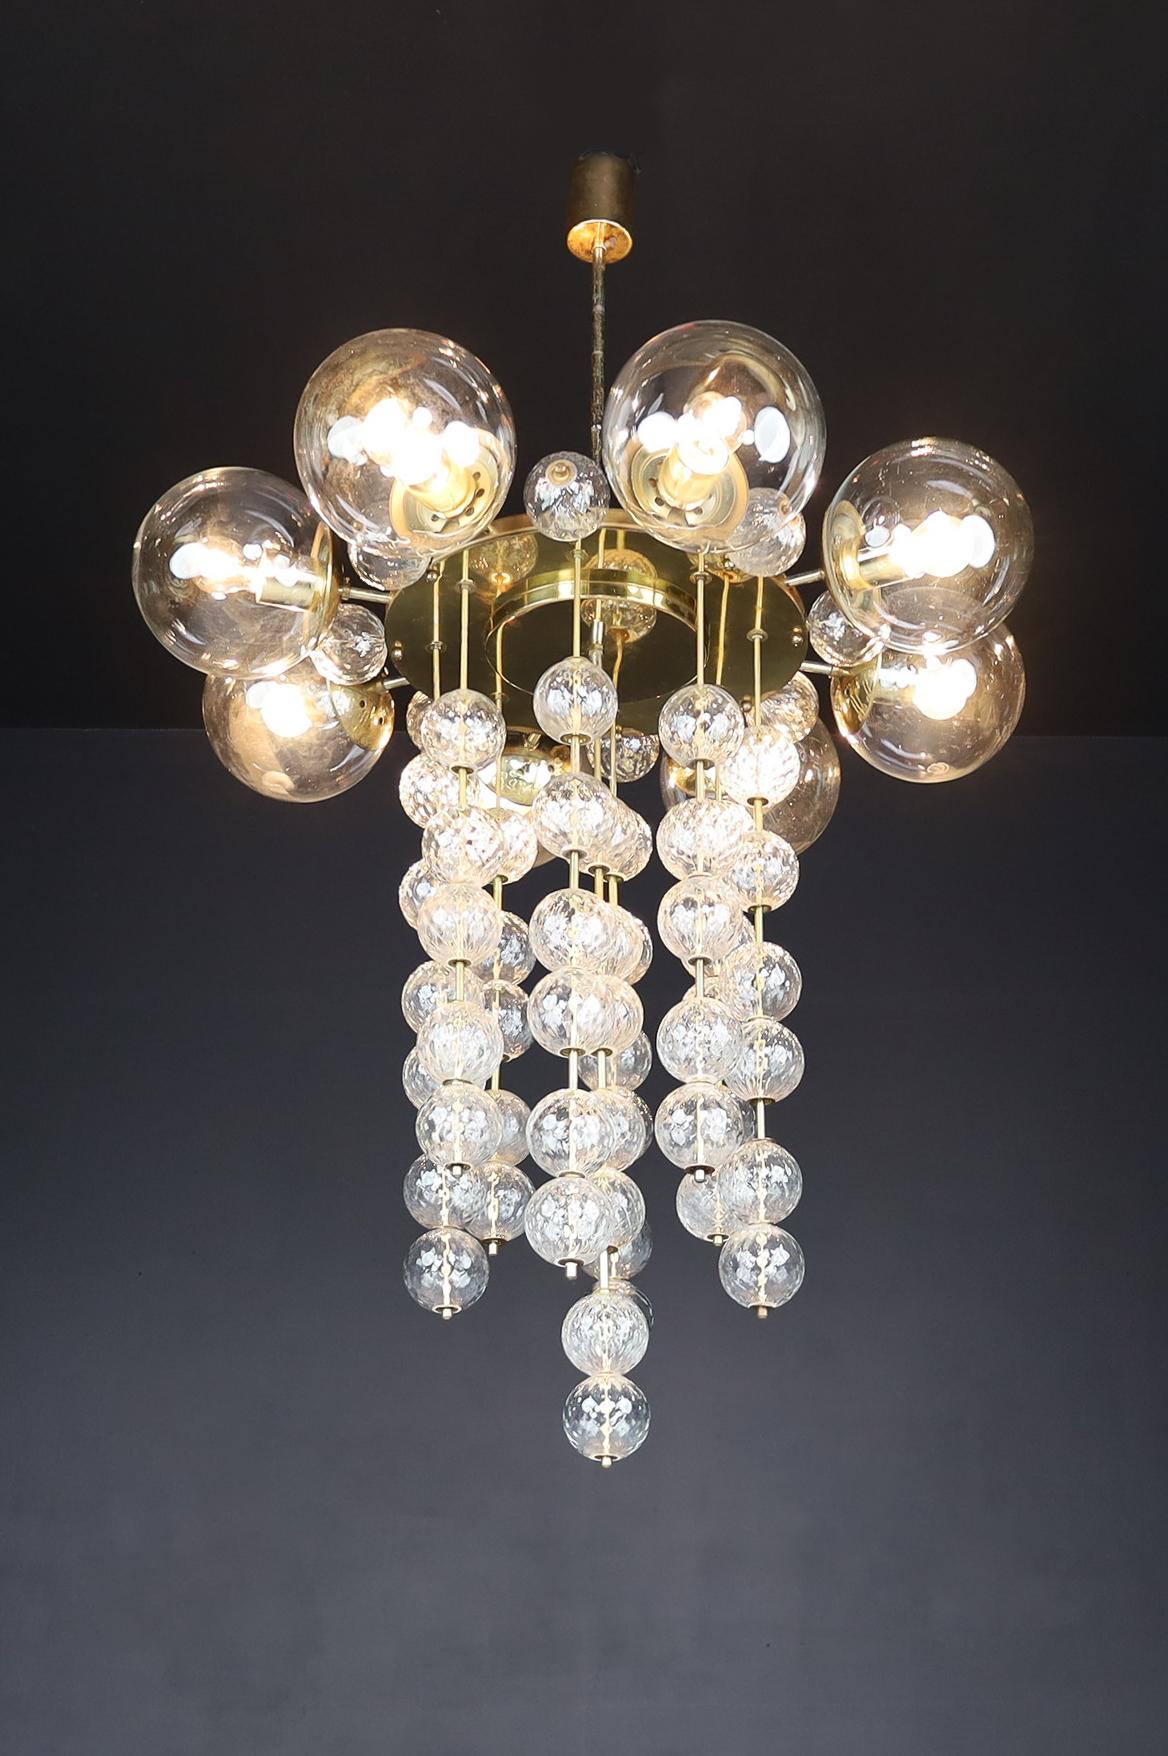 Grand Chandelier with Brass Fixture and Hand-blowed Glass Globes, 1960s For Sale 4